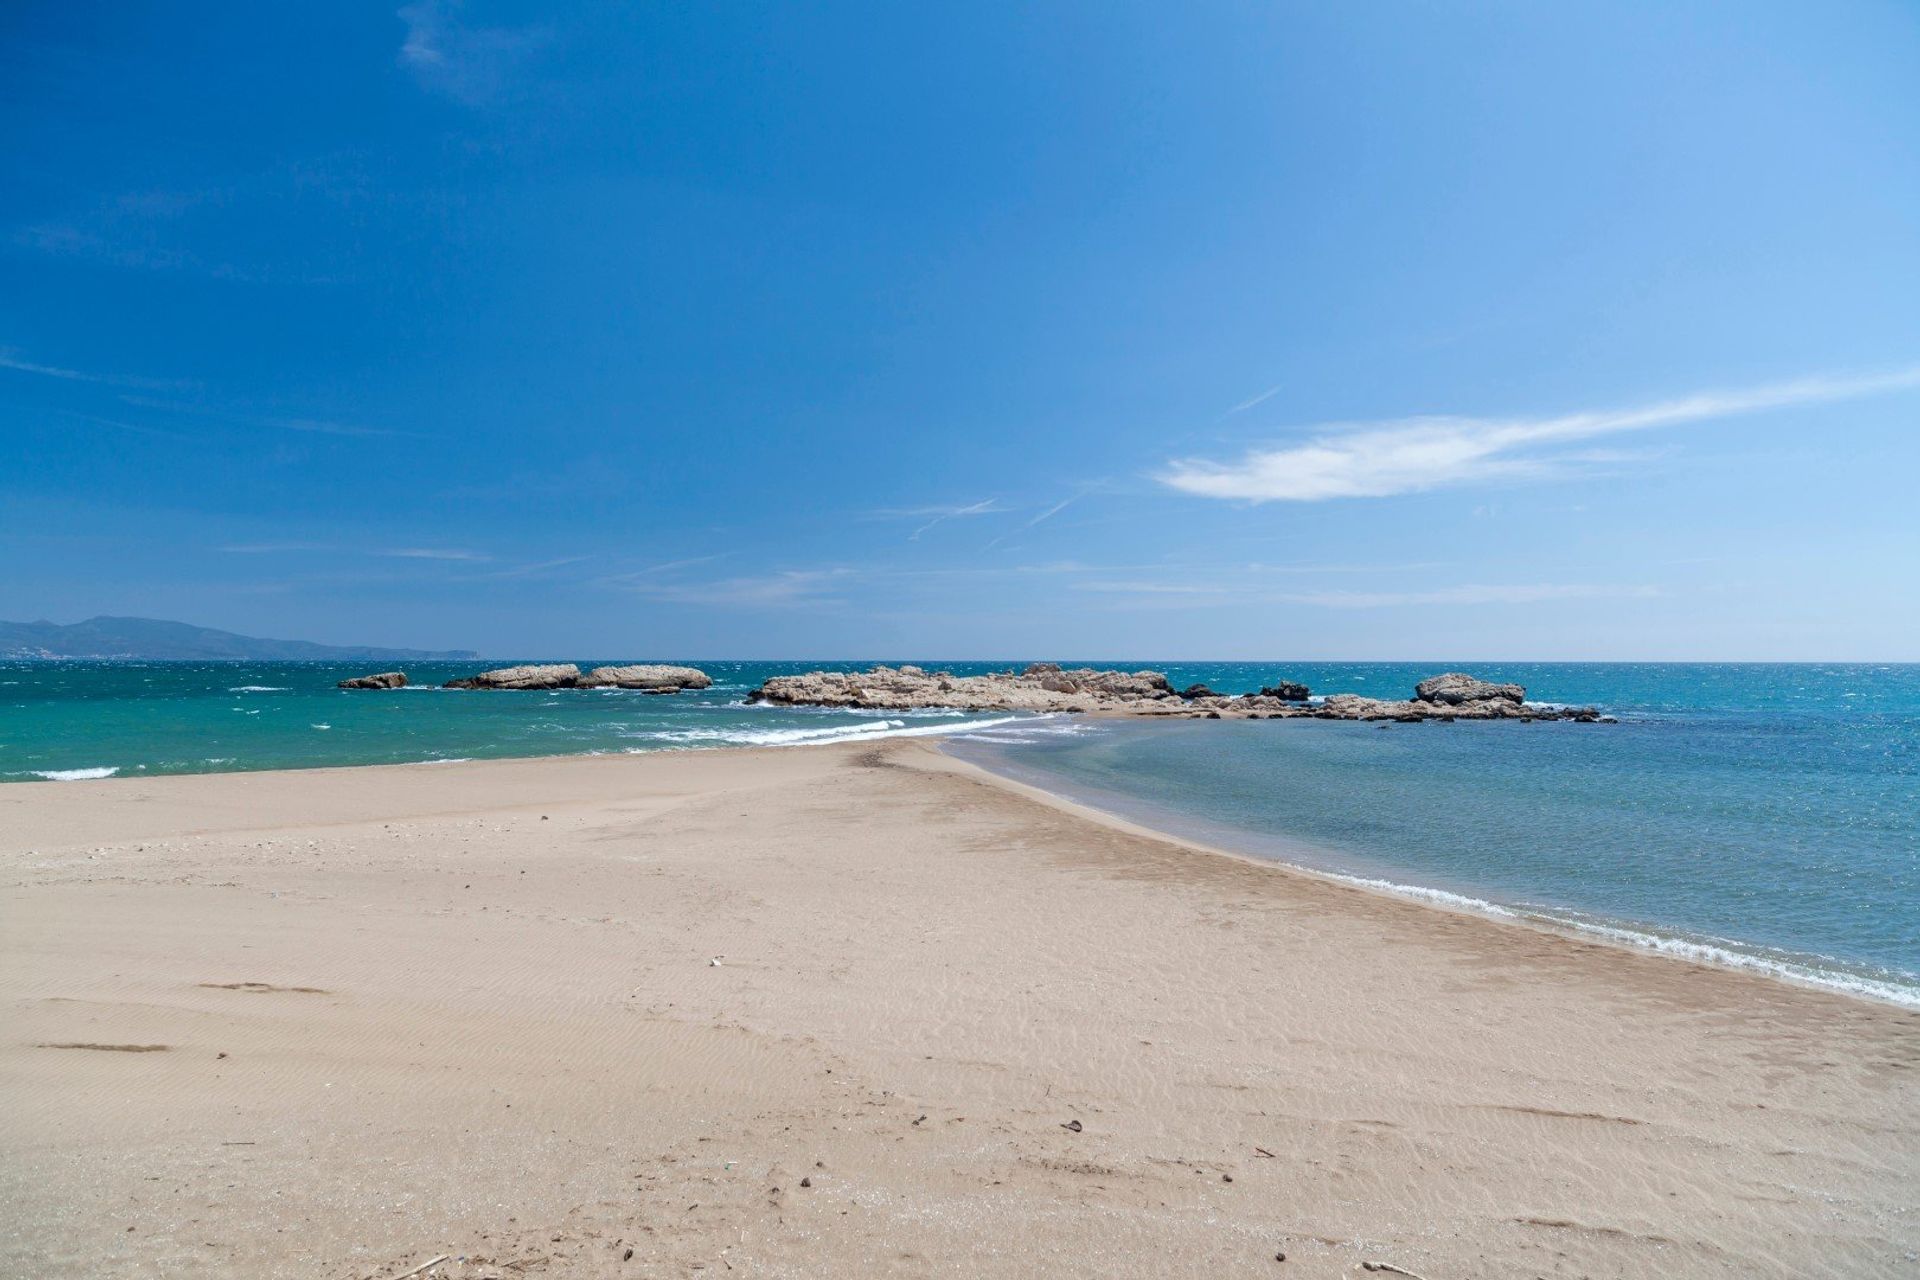 Try your hand at windsurfing at Les Muscleres beach, in front of the ruins of Empuries